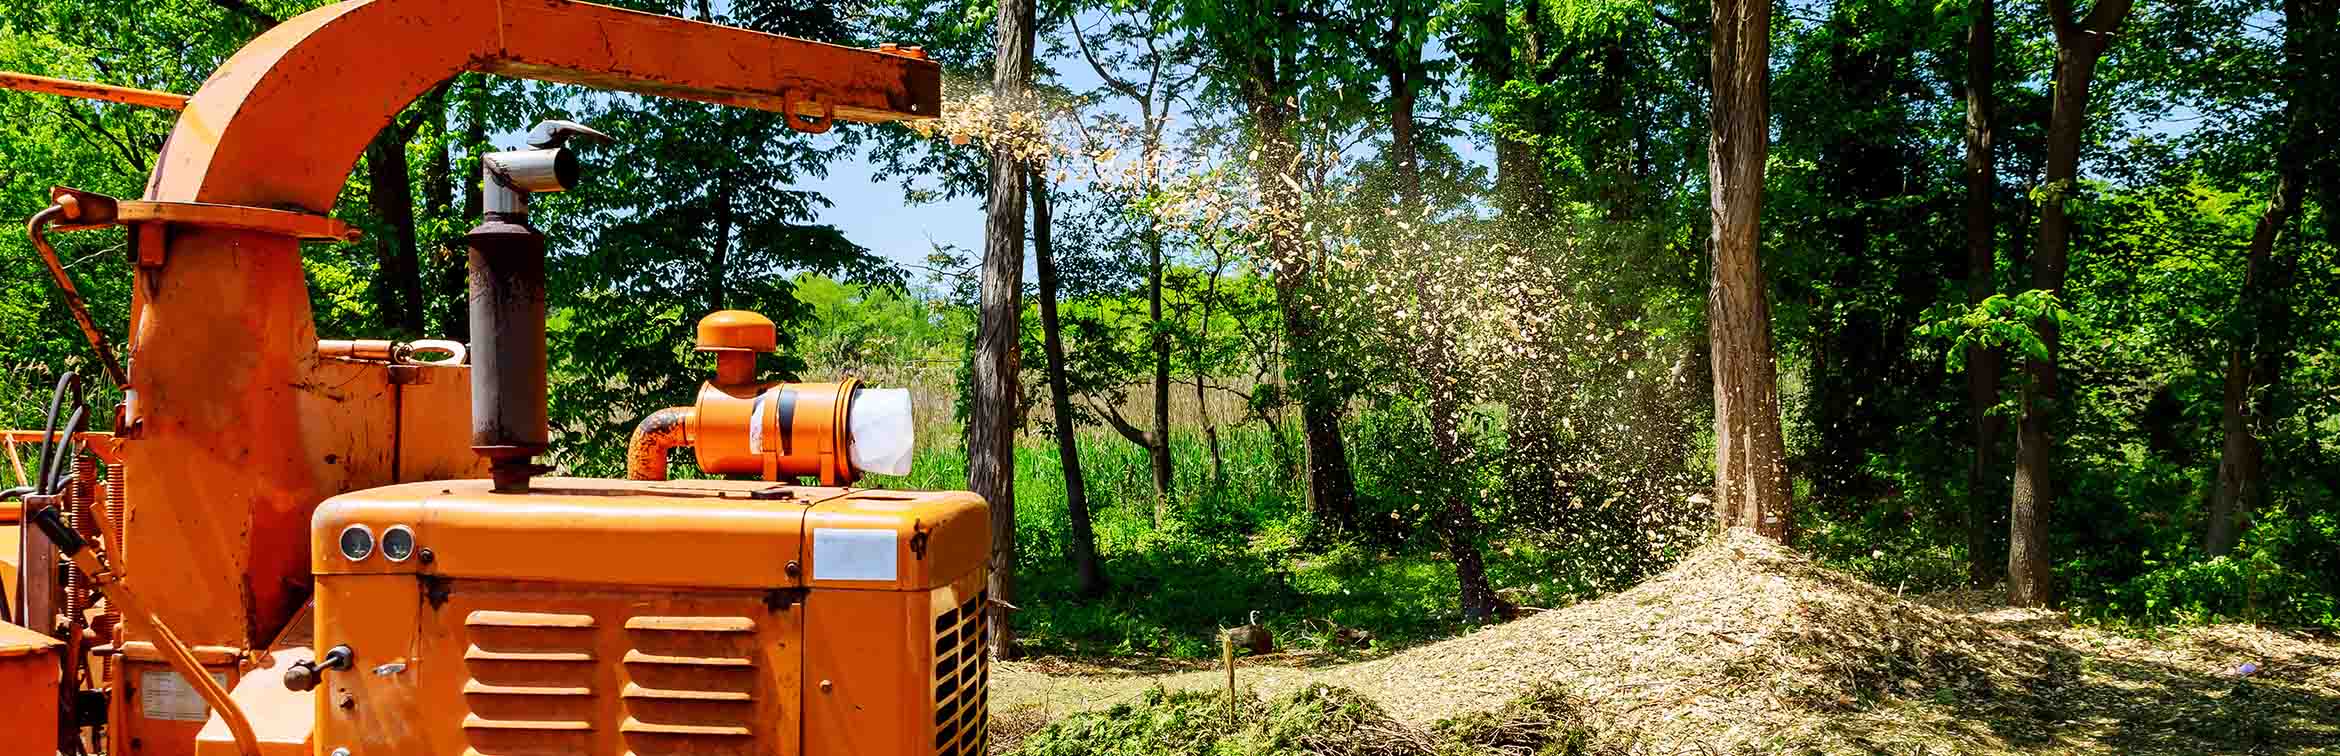 Need A Wood Chipper Here S What To Know Before You Buy